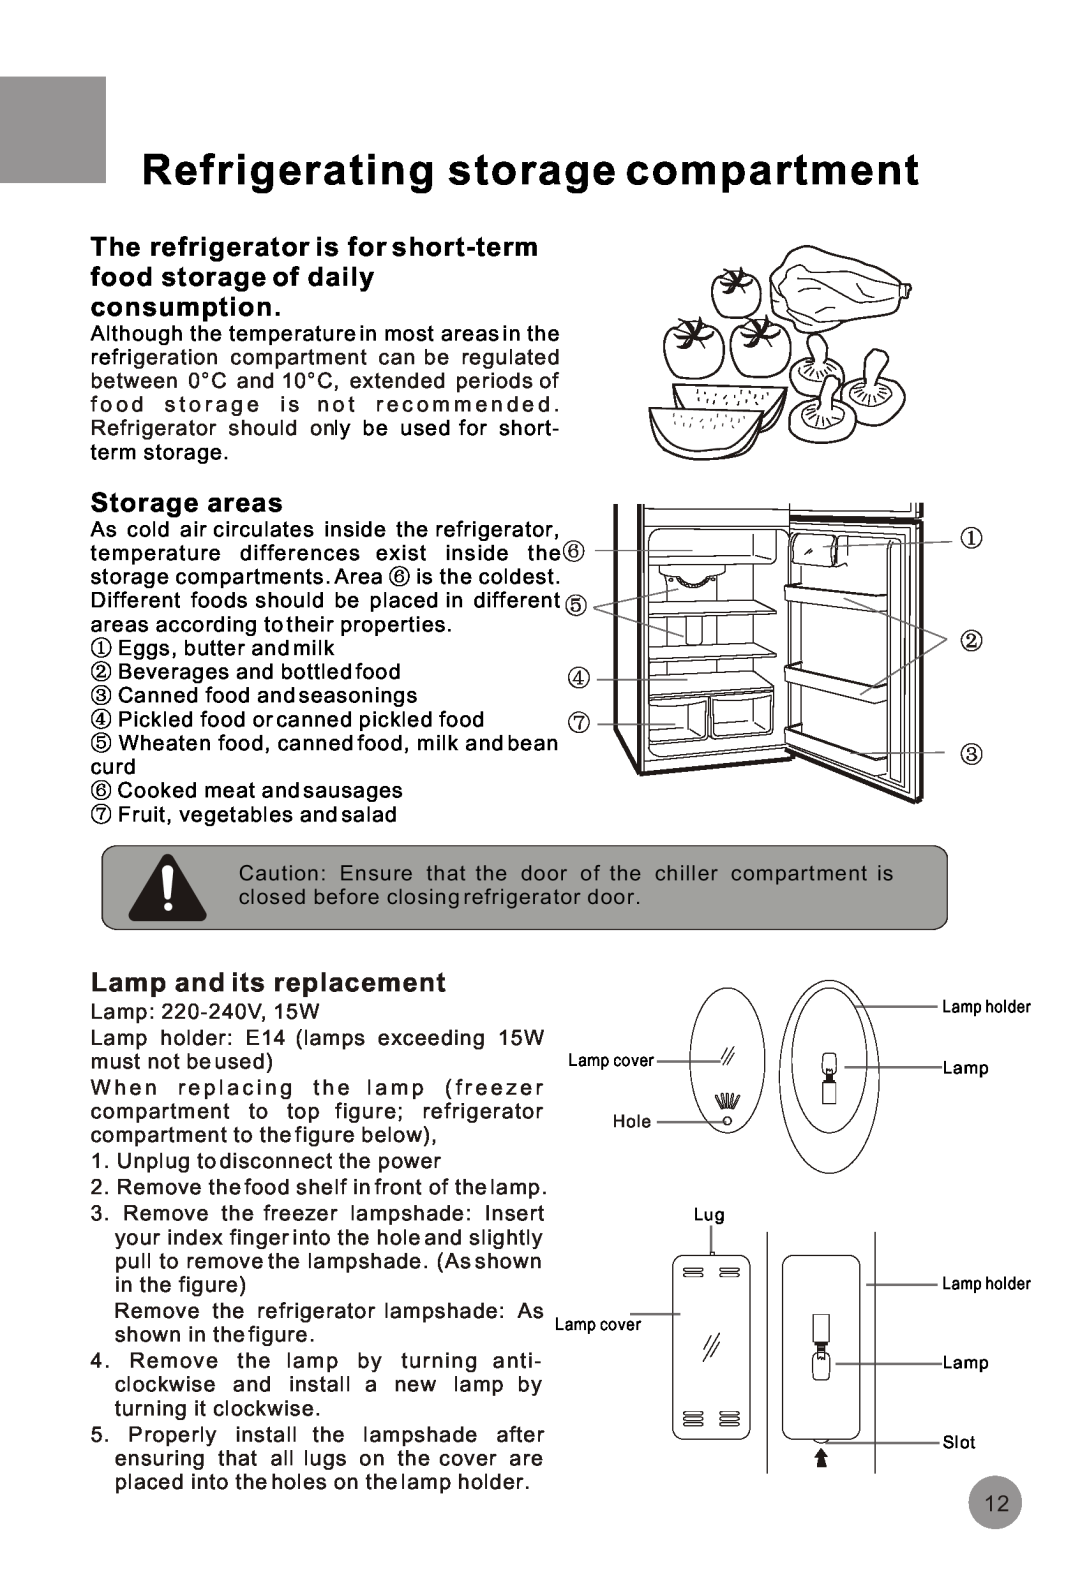 Haier HRF-516FKA Refrigerating storage compartment, The refrigerator is for short-term food storage of daily consumption 